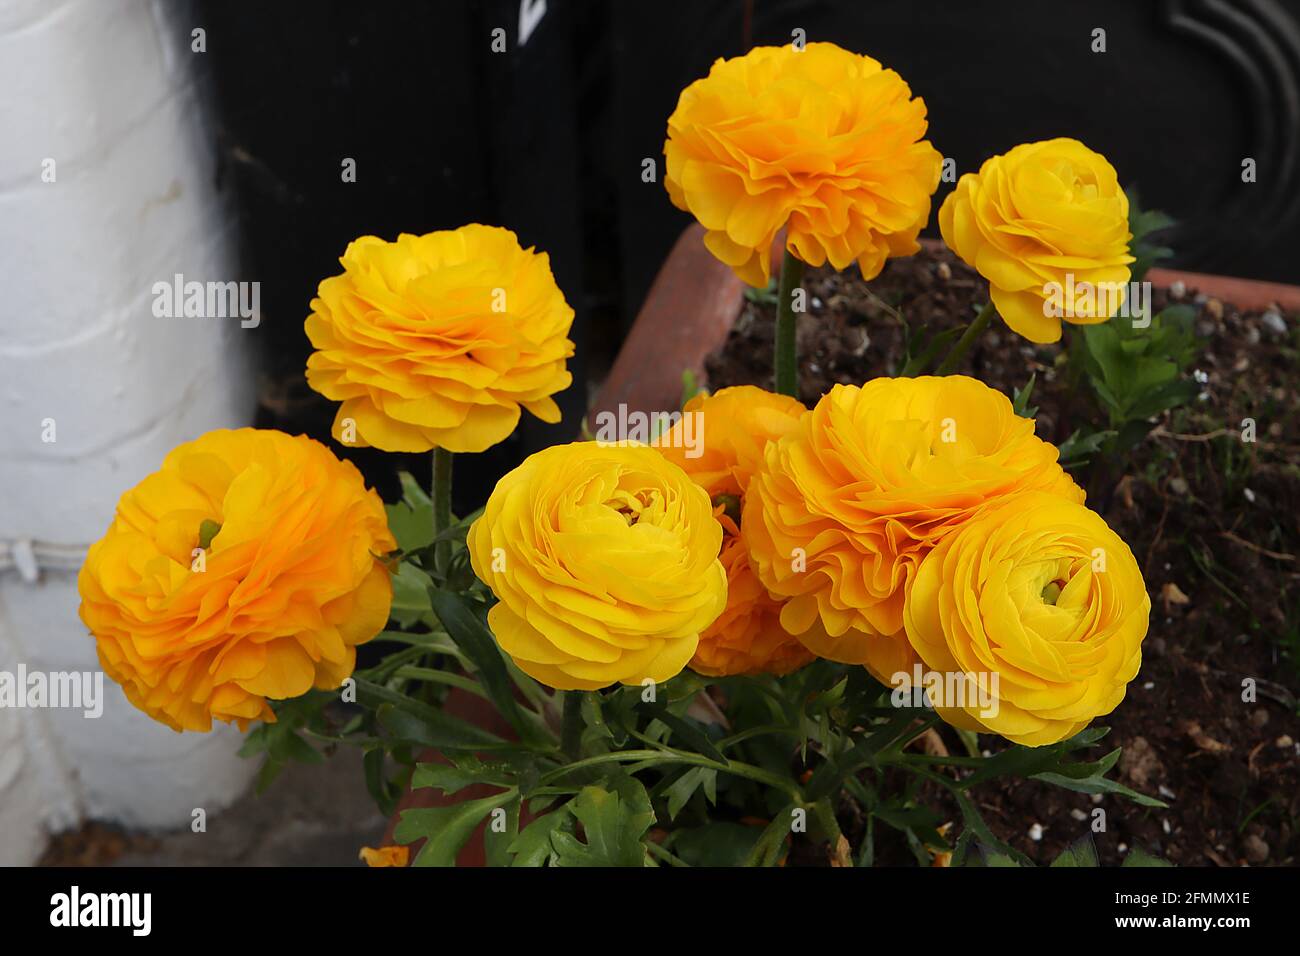 Ranunculus asiaticus Persian buttercup – golden yellow roseforum flowers with multiple layers of petals,  May, England, UK Stock Photo